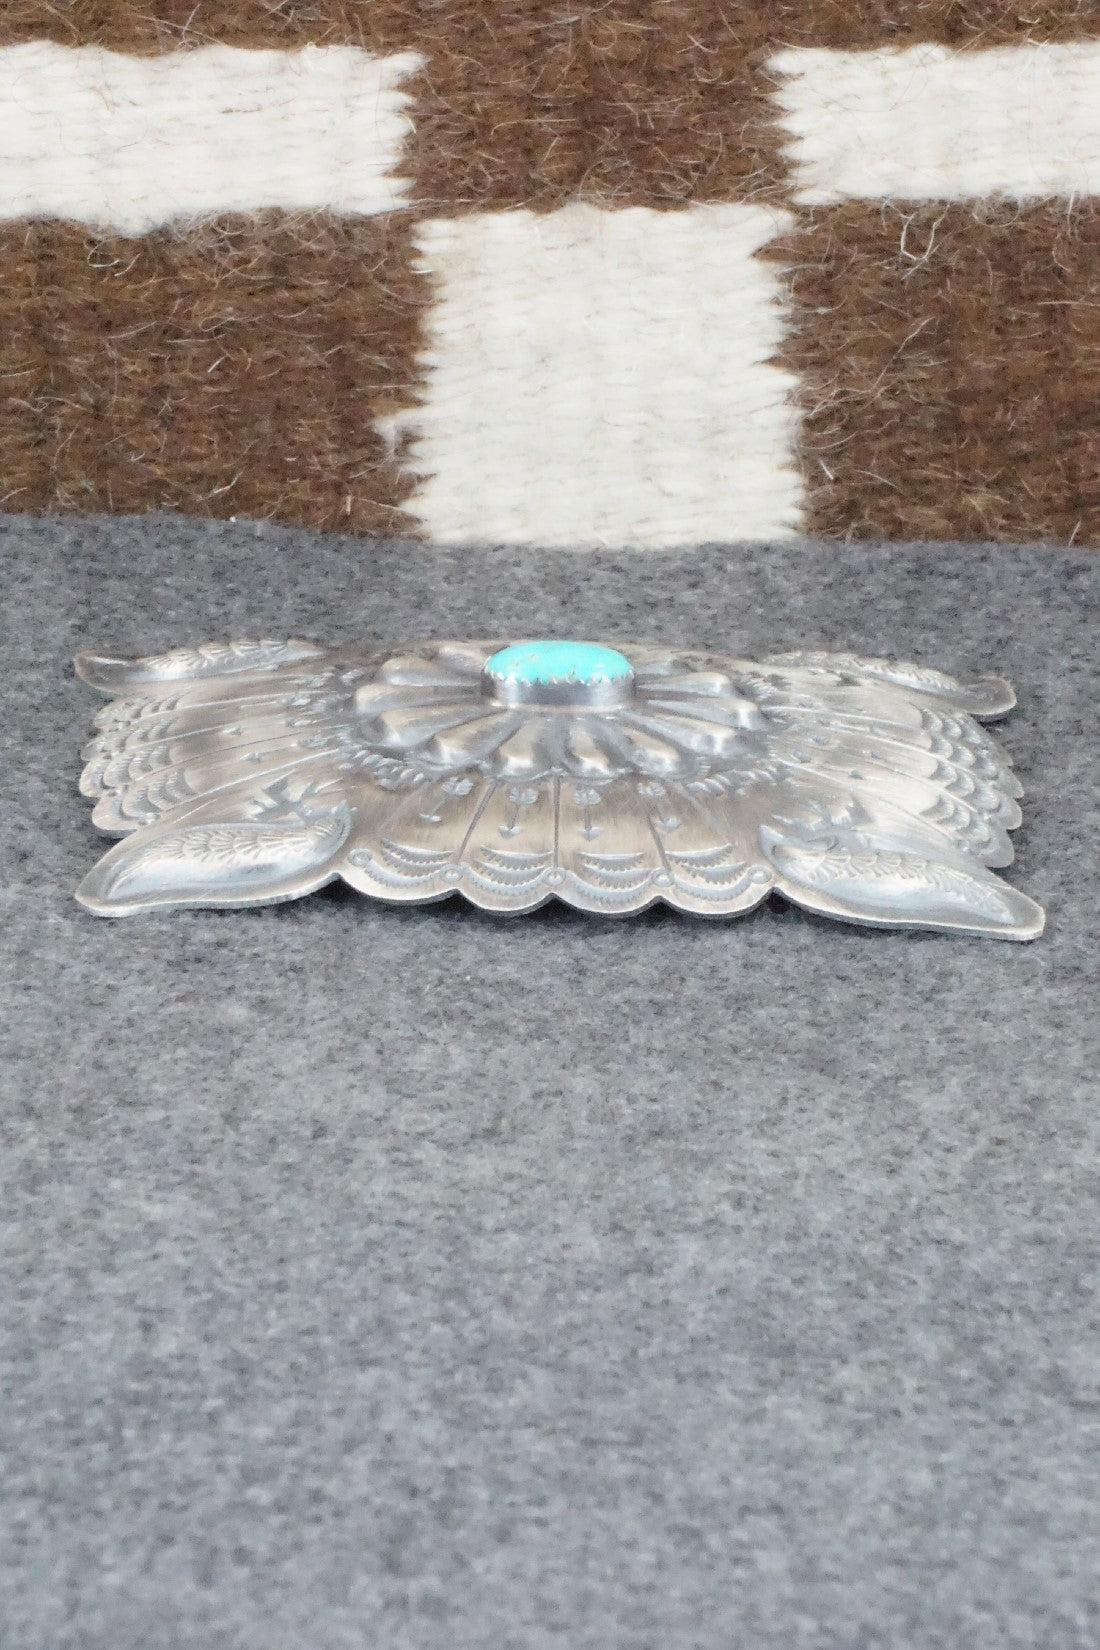 Turquoise & Sterling Silver Belt Buckle - Dale Morgan